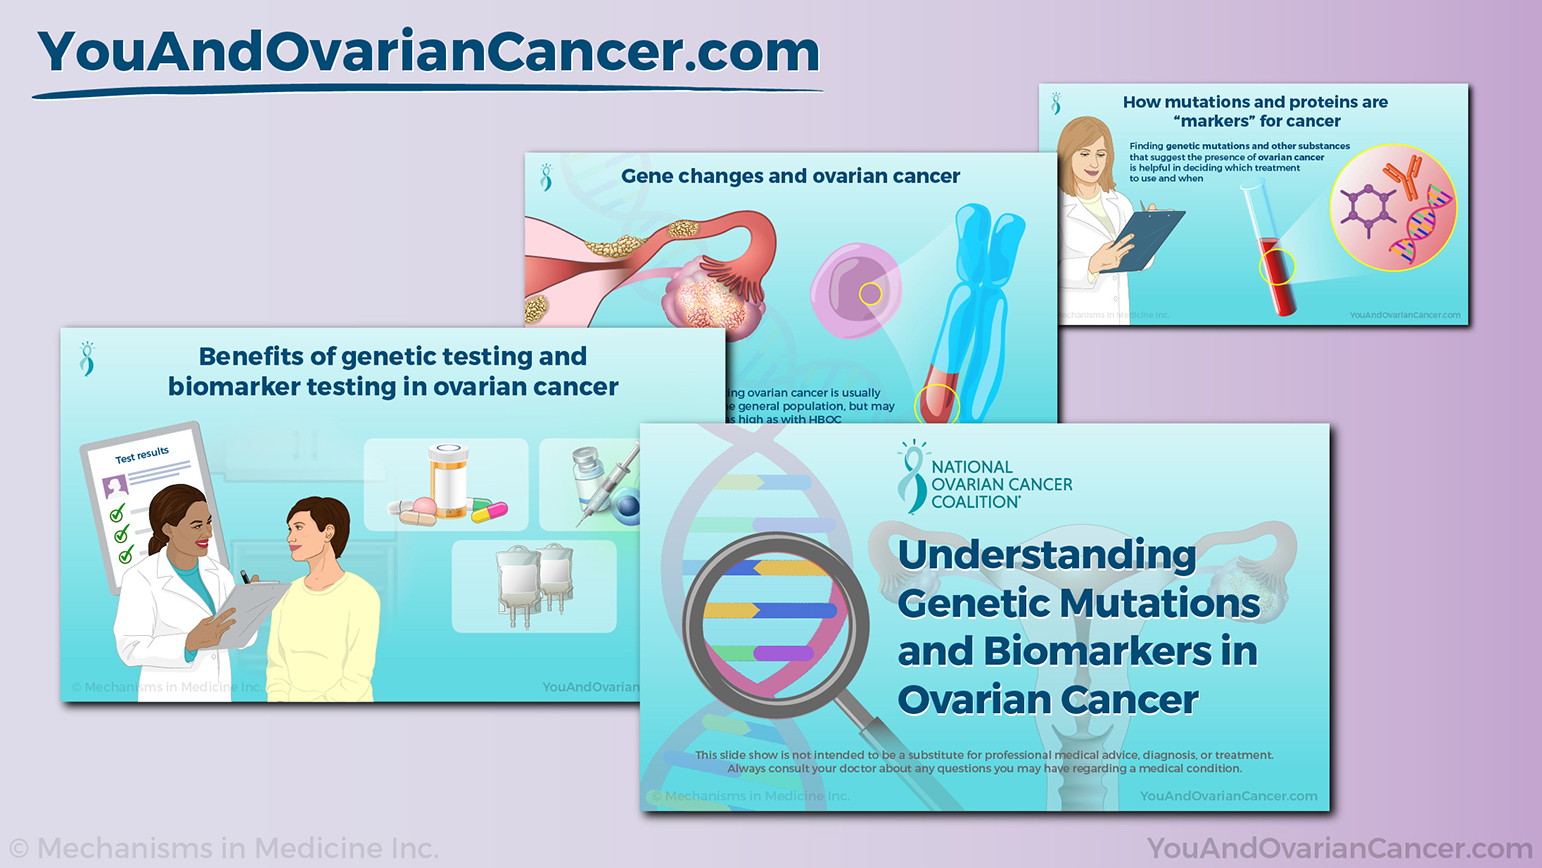 Understanding Genetic Mutations and Biomarkers in Ovarian Cancer